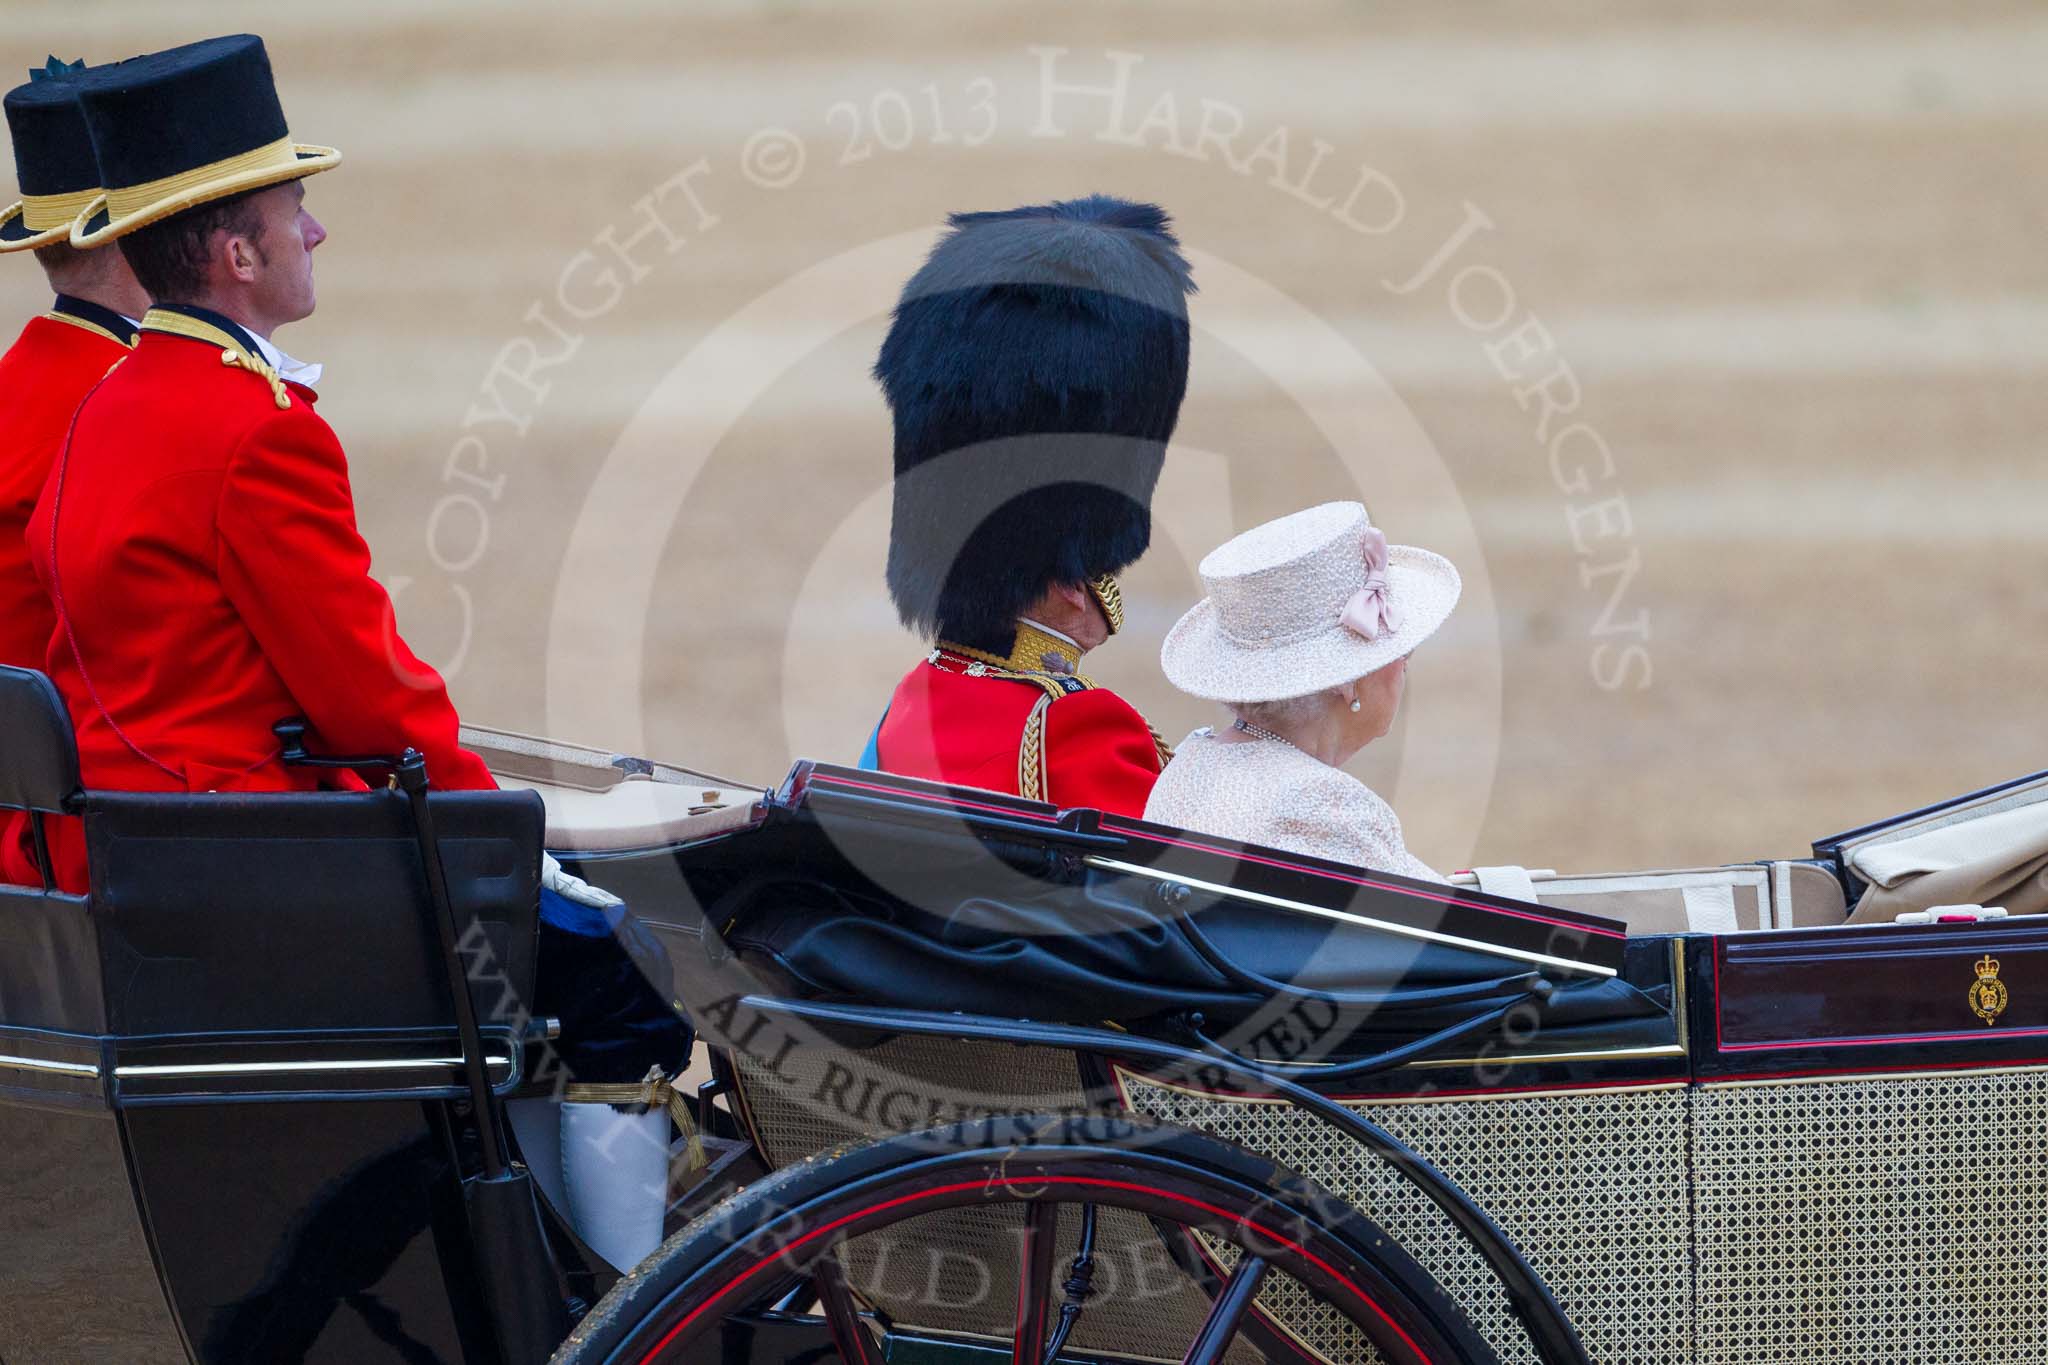 Trooping the Colour 2015. Image #669, 13 June 2015 12:10 Horse Guards Parade, London, UK